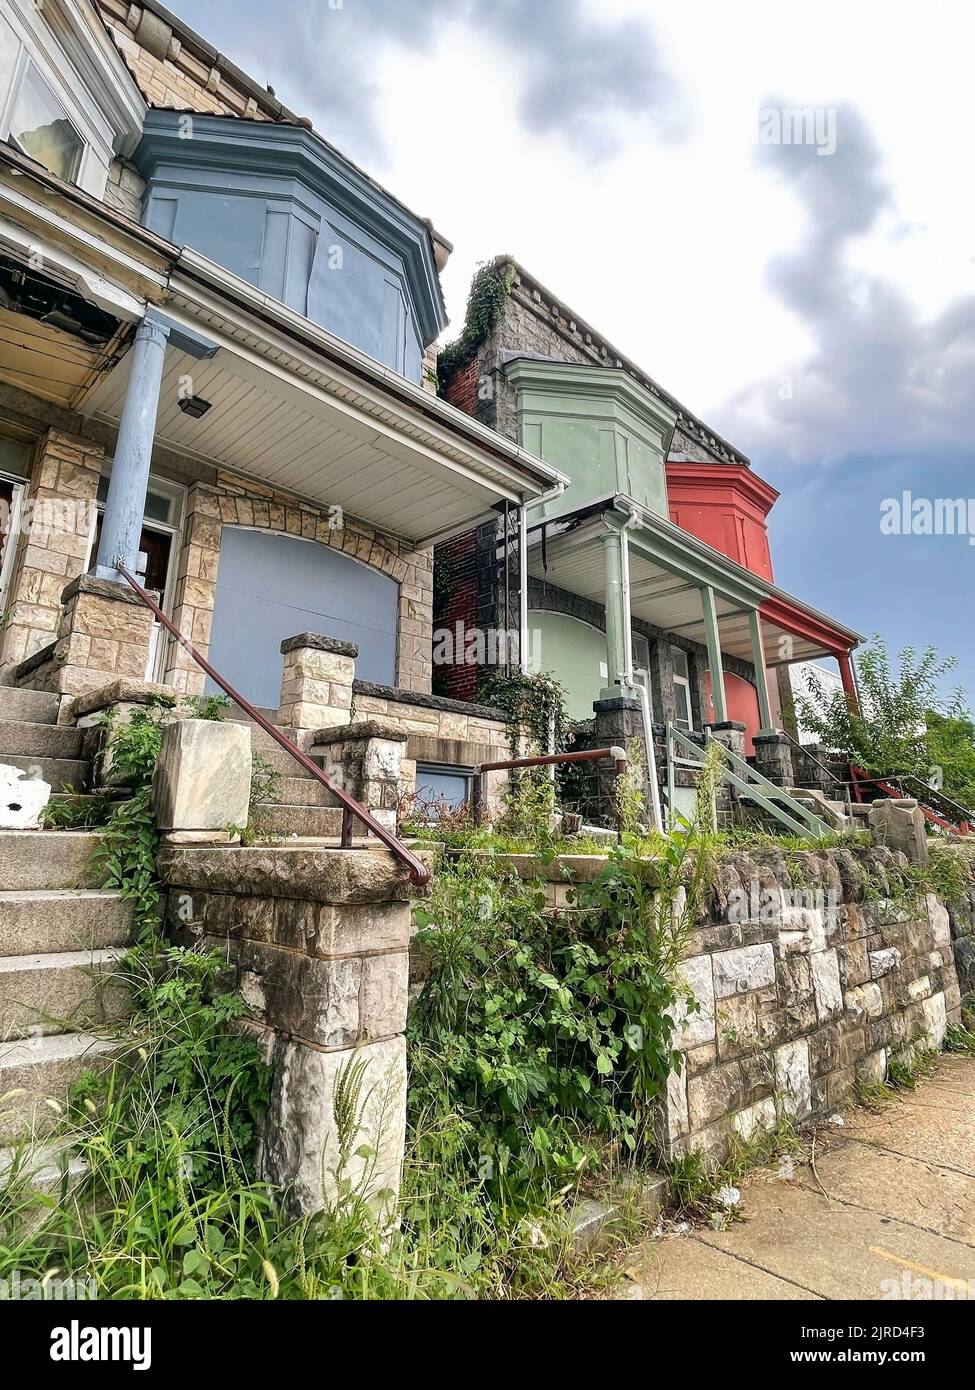 A few pairs of  charming 19th century vacant townhouses with large bay windows are boarded up and overgrown with weeds on a stormy summer day. Stock Photo